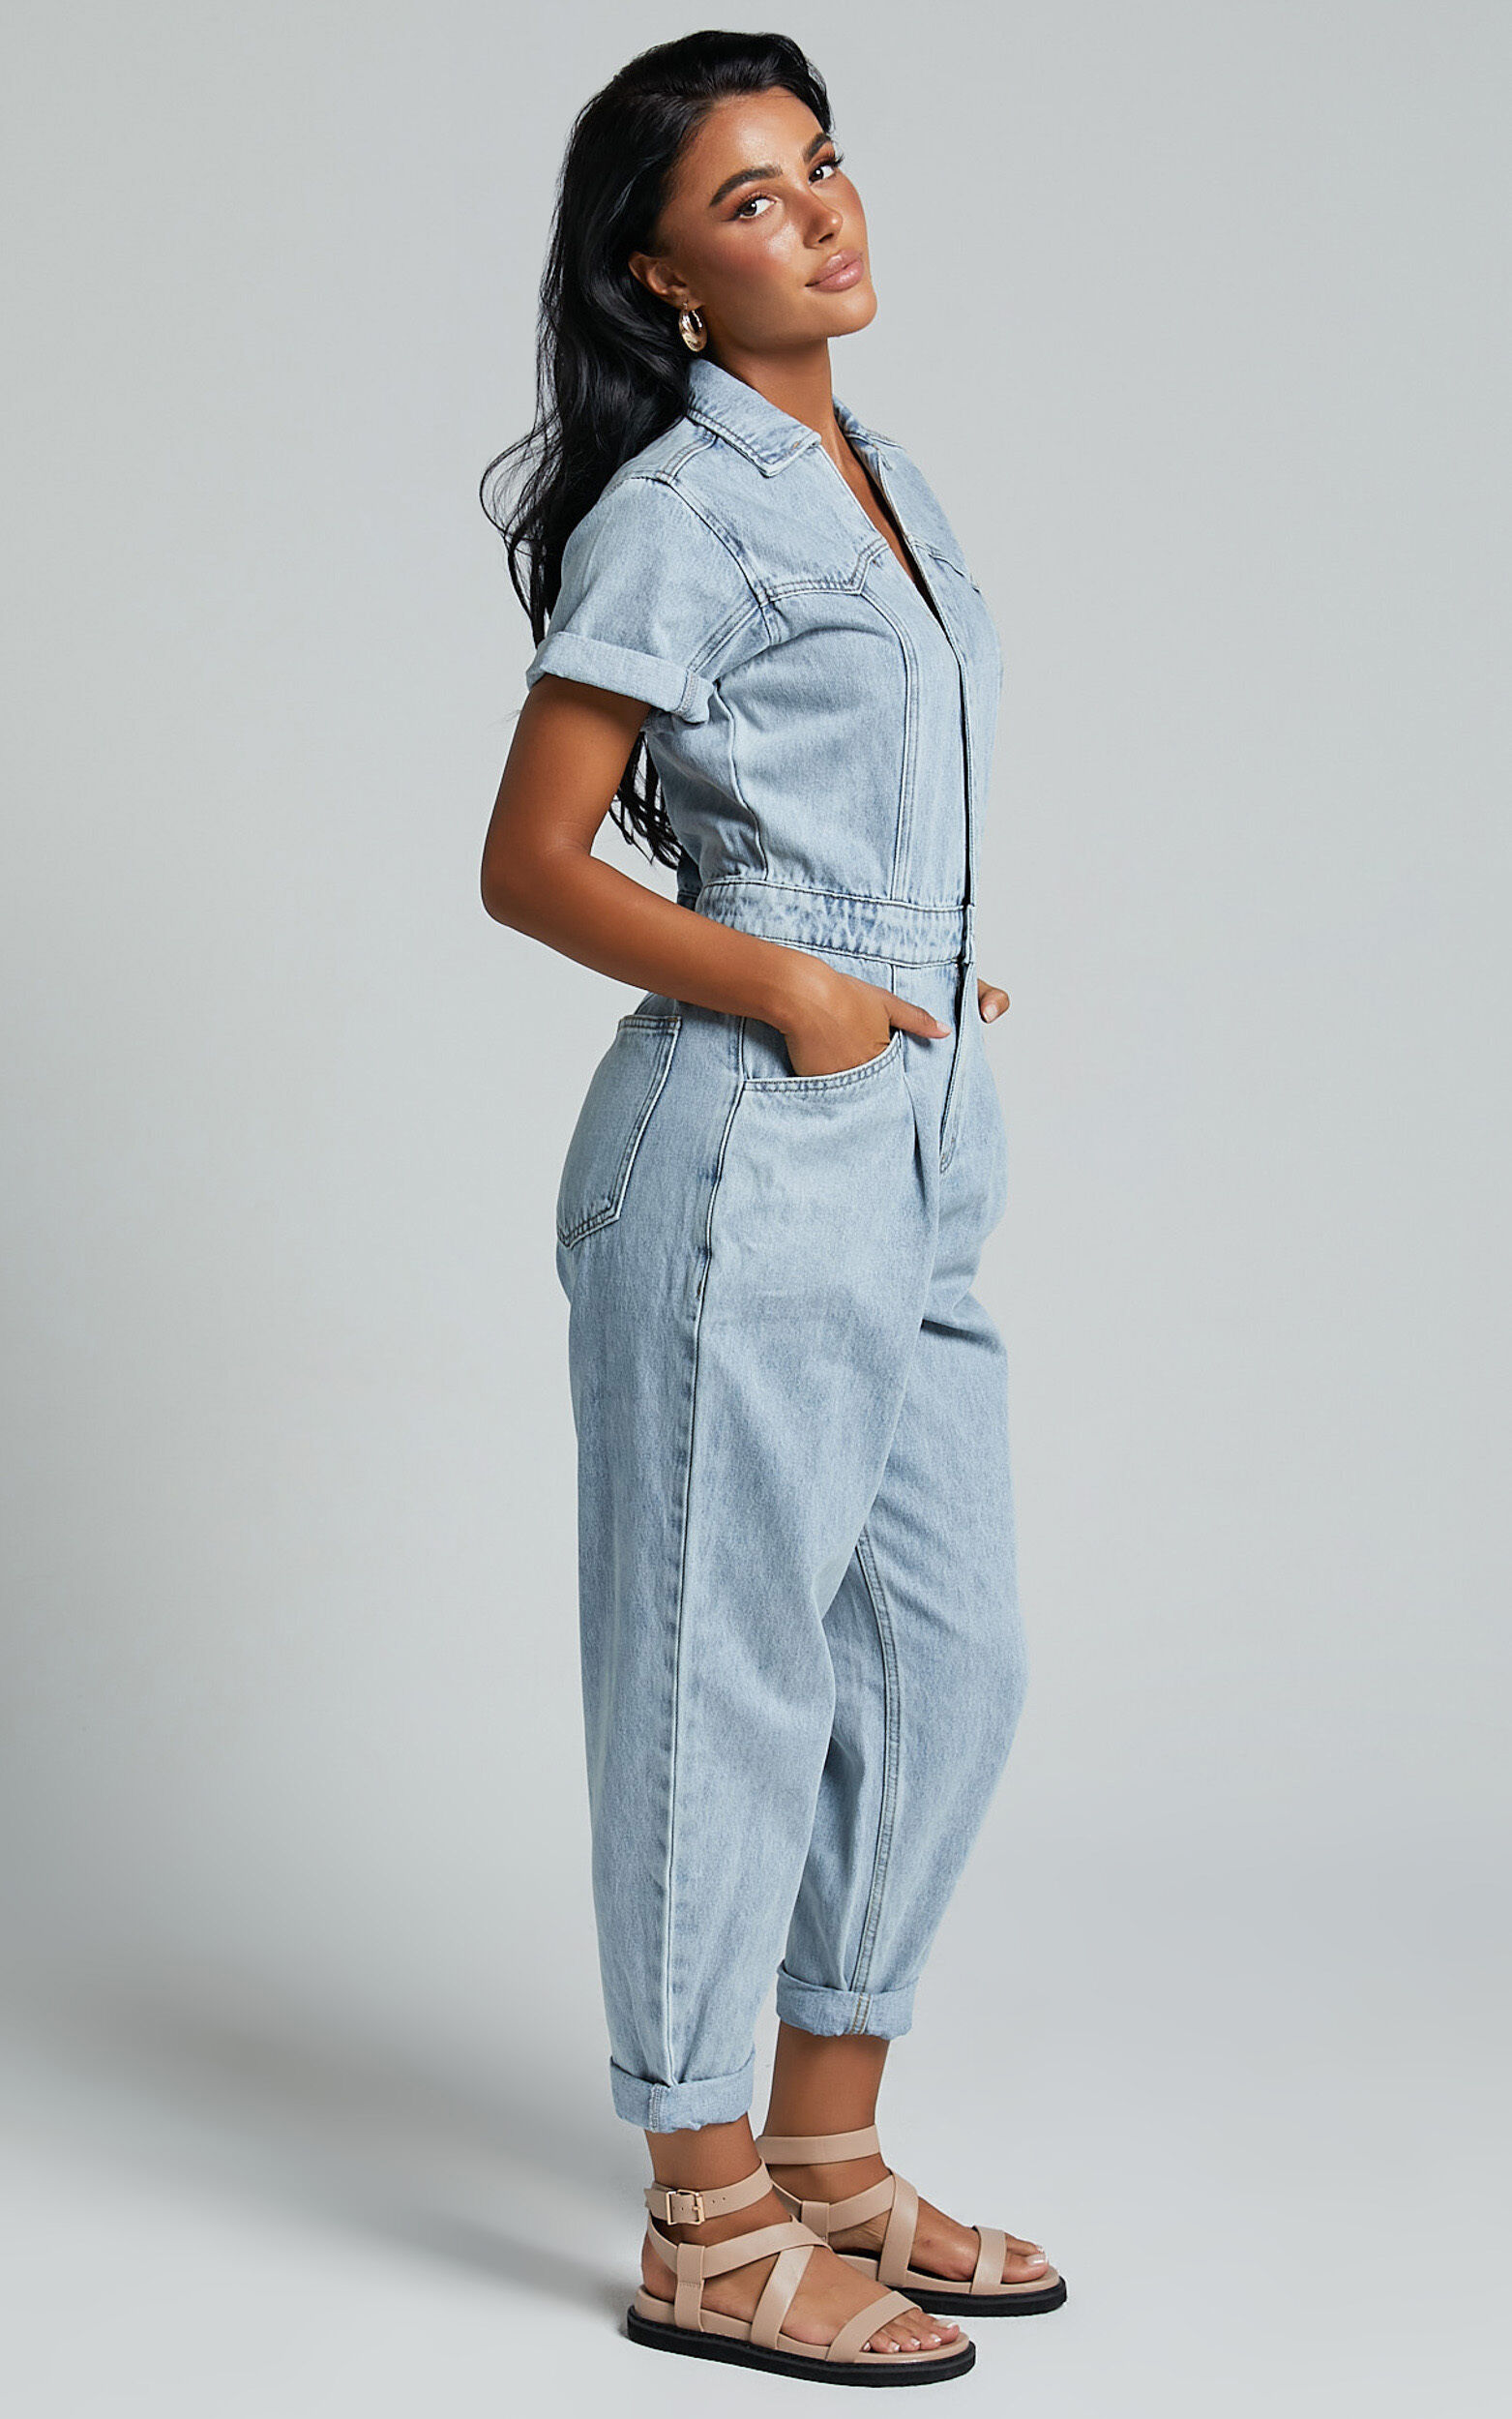 Short Sleeve Buttoned Jumpsuit - White or Denim Blue - Just $4